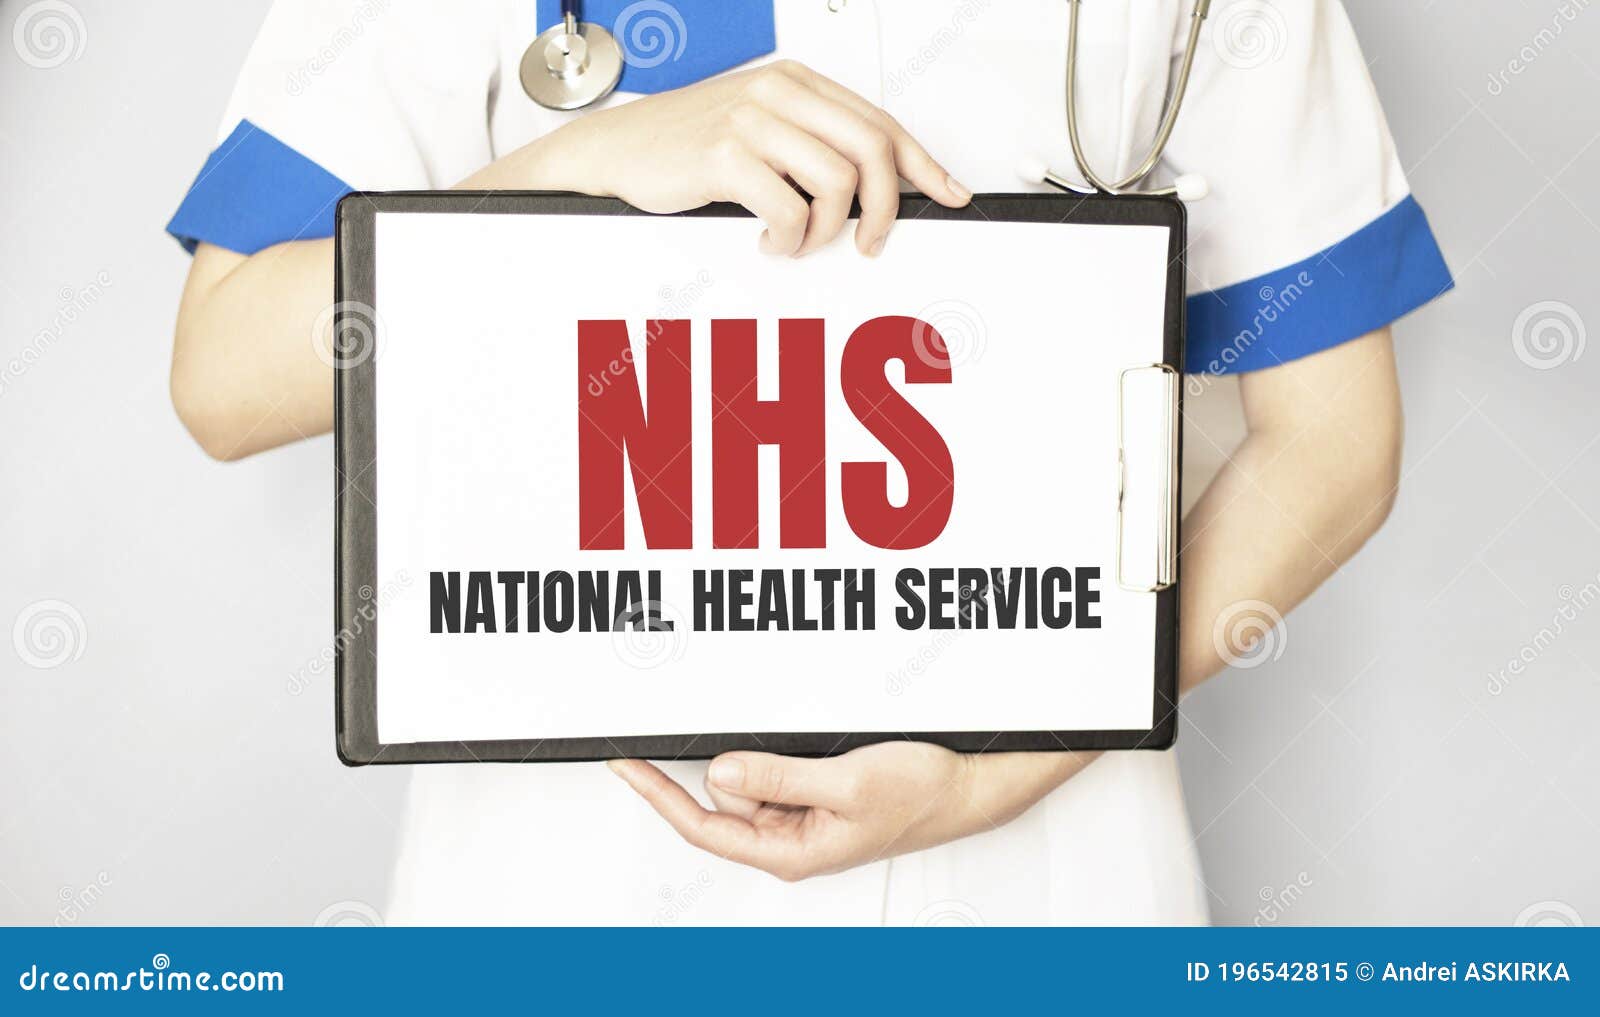 doctor holding a paper plate with text nhs, medical concept